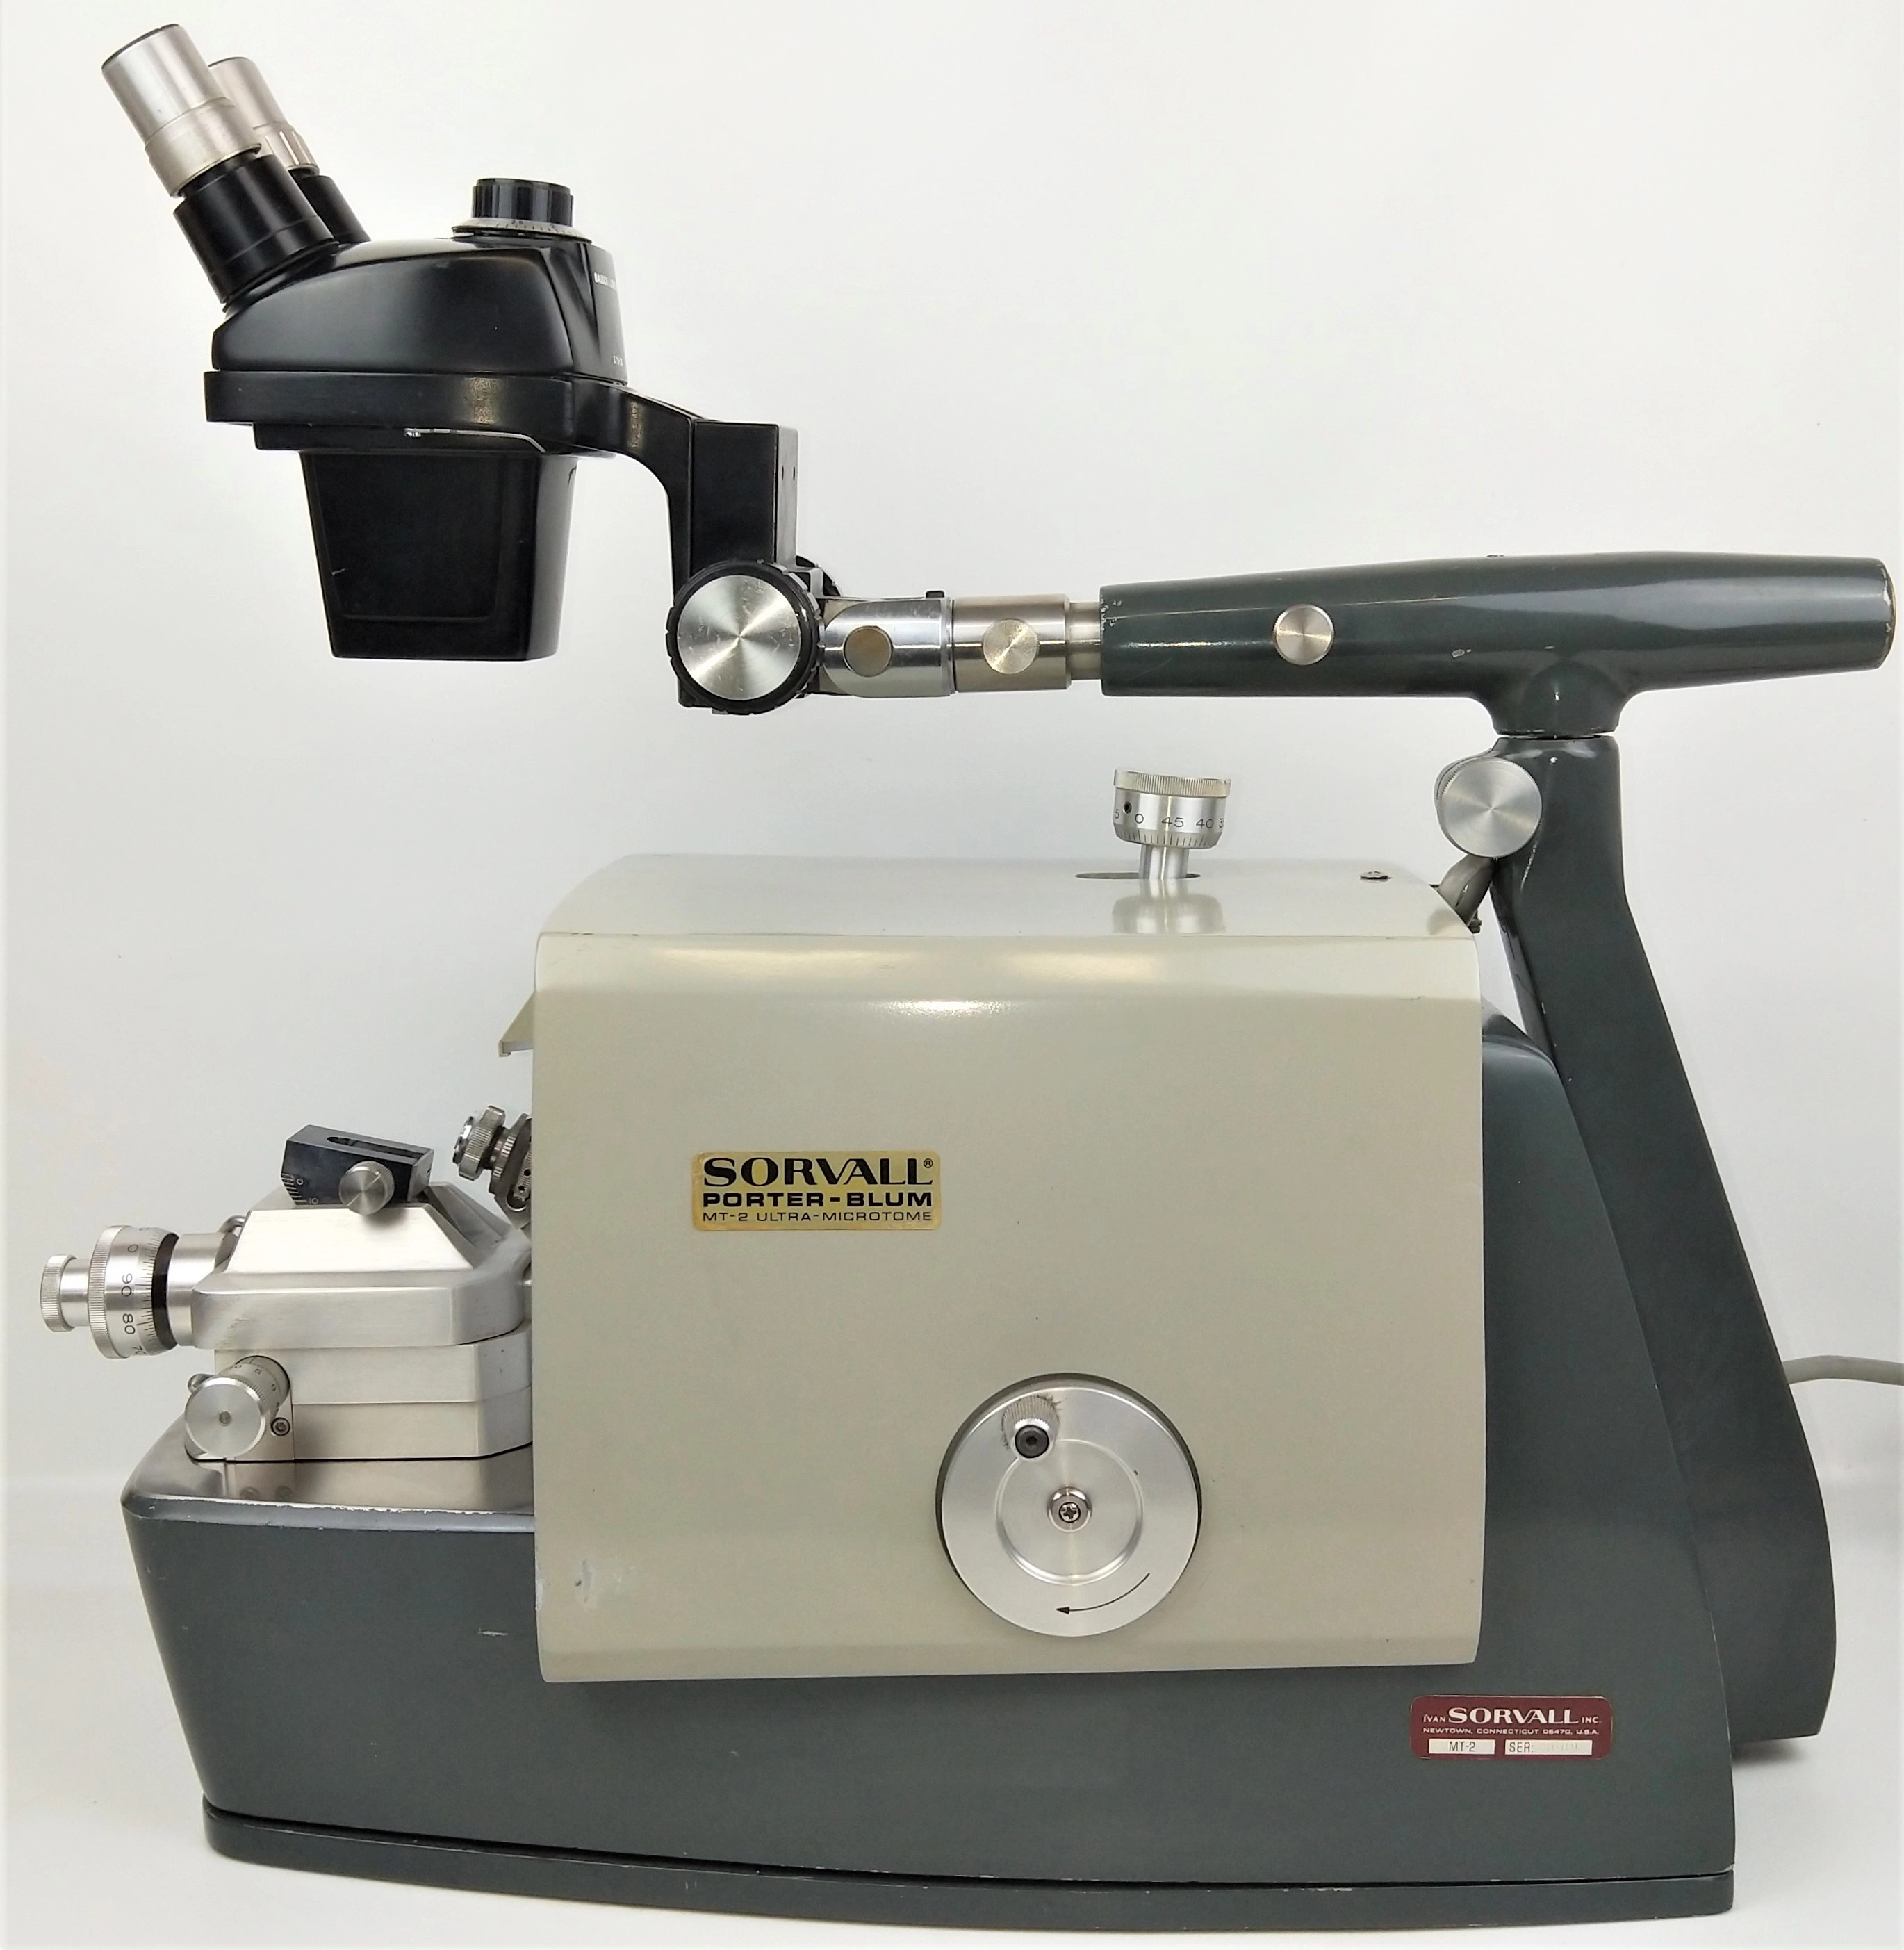 Sorvall "Porter-Blum" MT-2 Ultra Microtome with Bausch and Lomb Microscope Head - REDUCED!